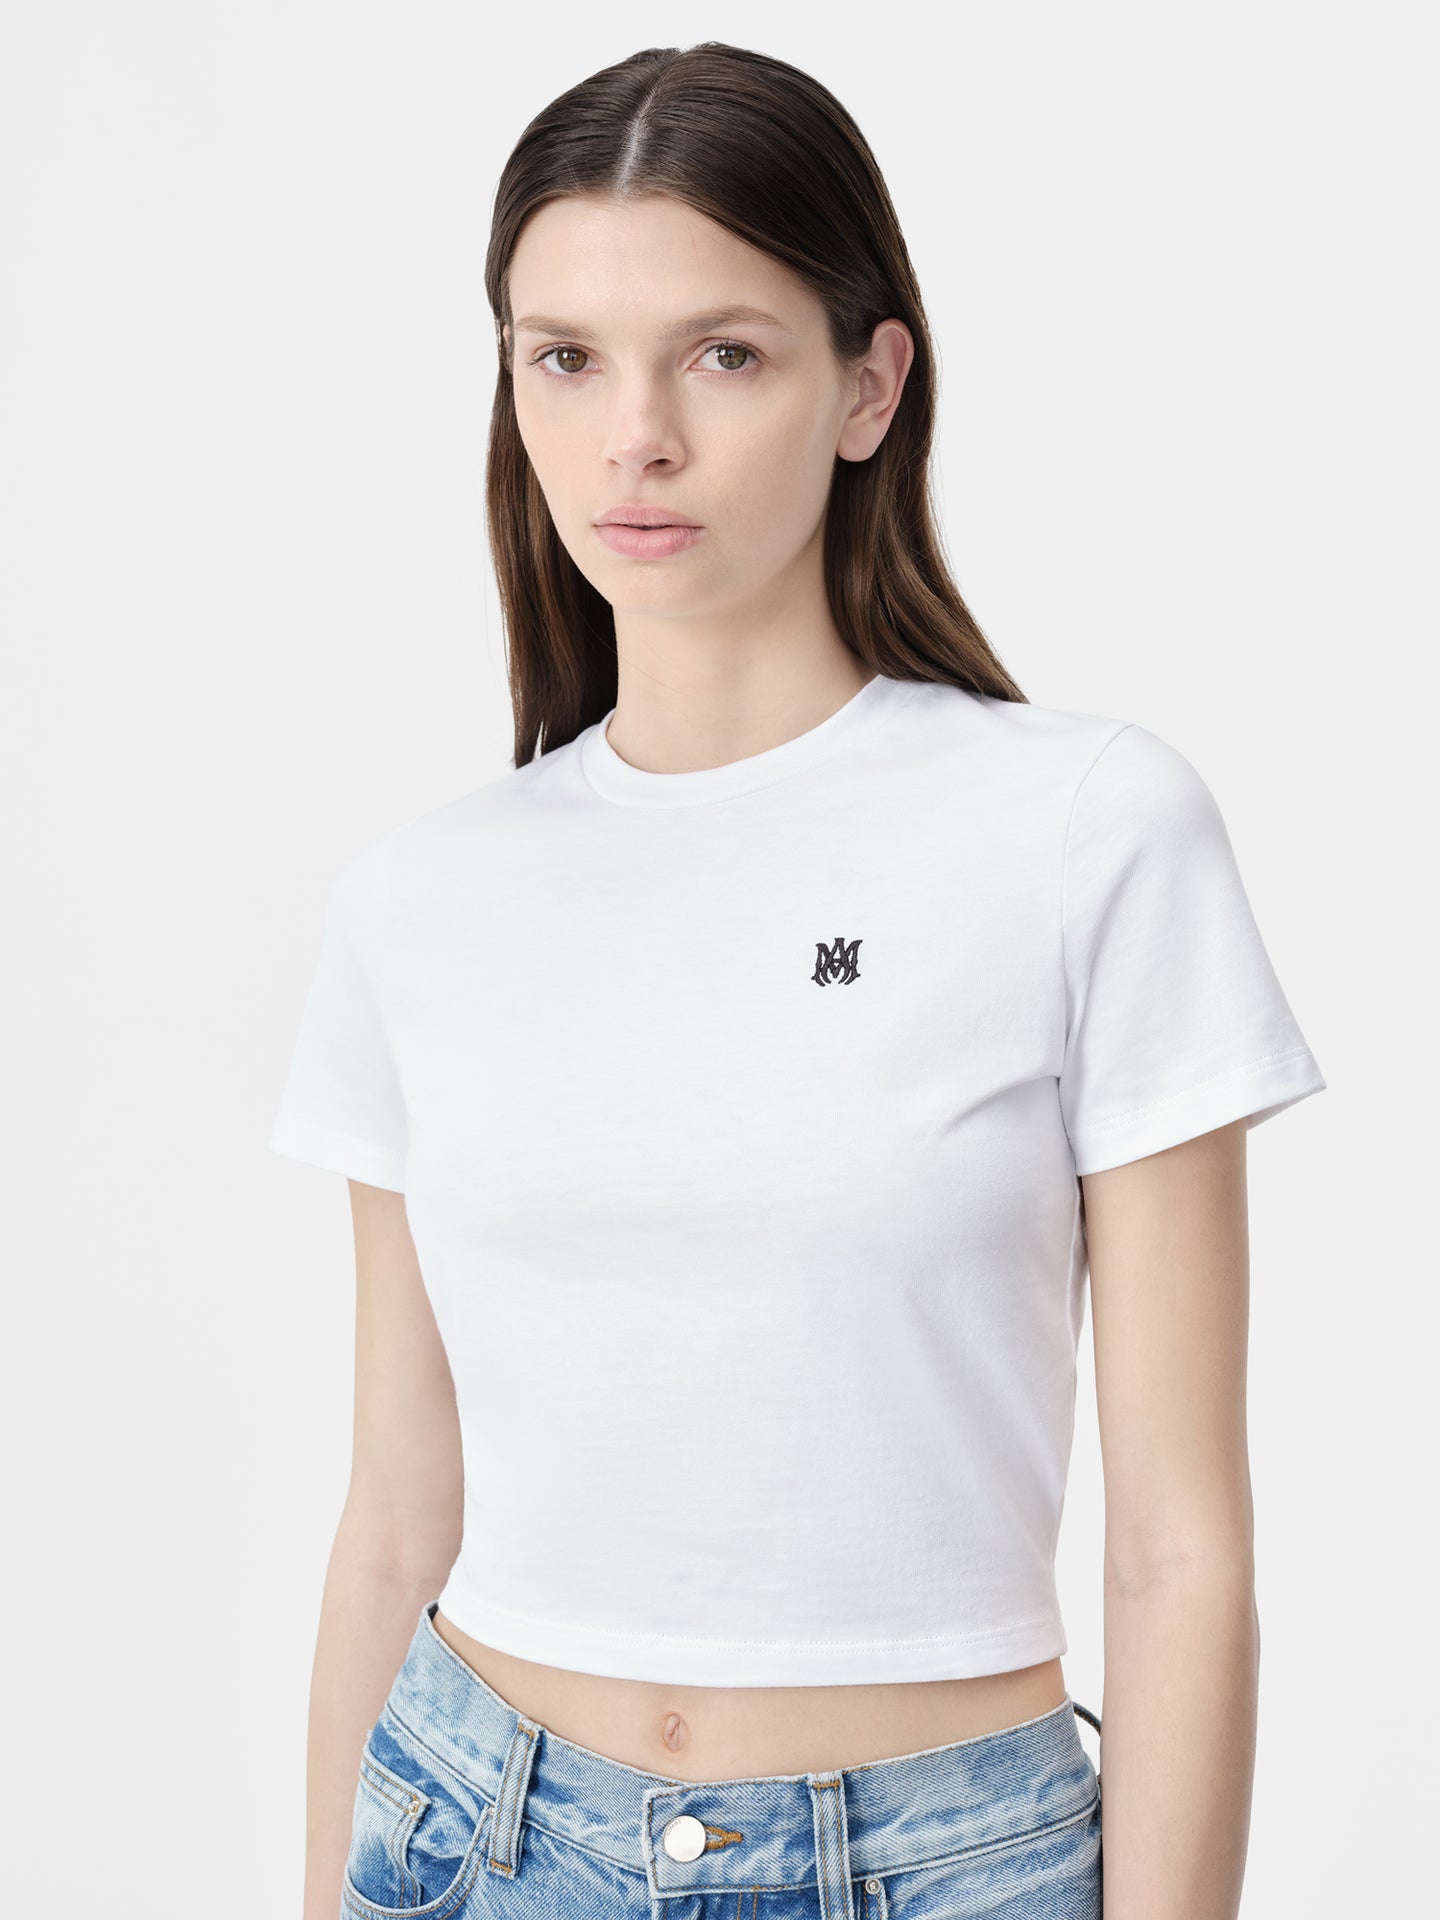 WOMEN - WOMEN'S MA EMBROIDERED BABY TEE - White